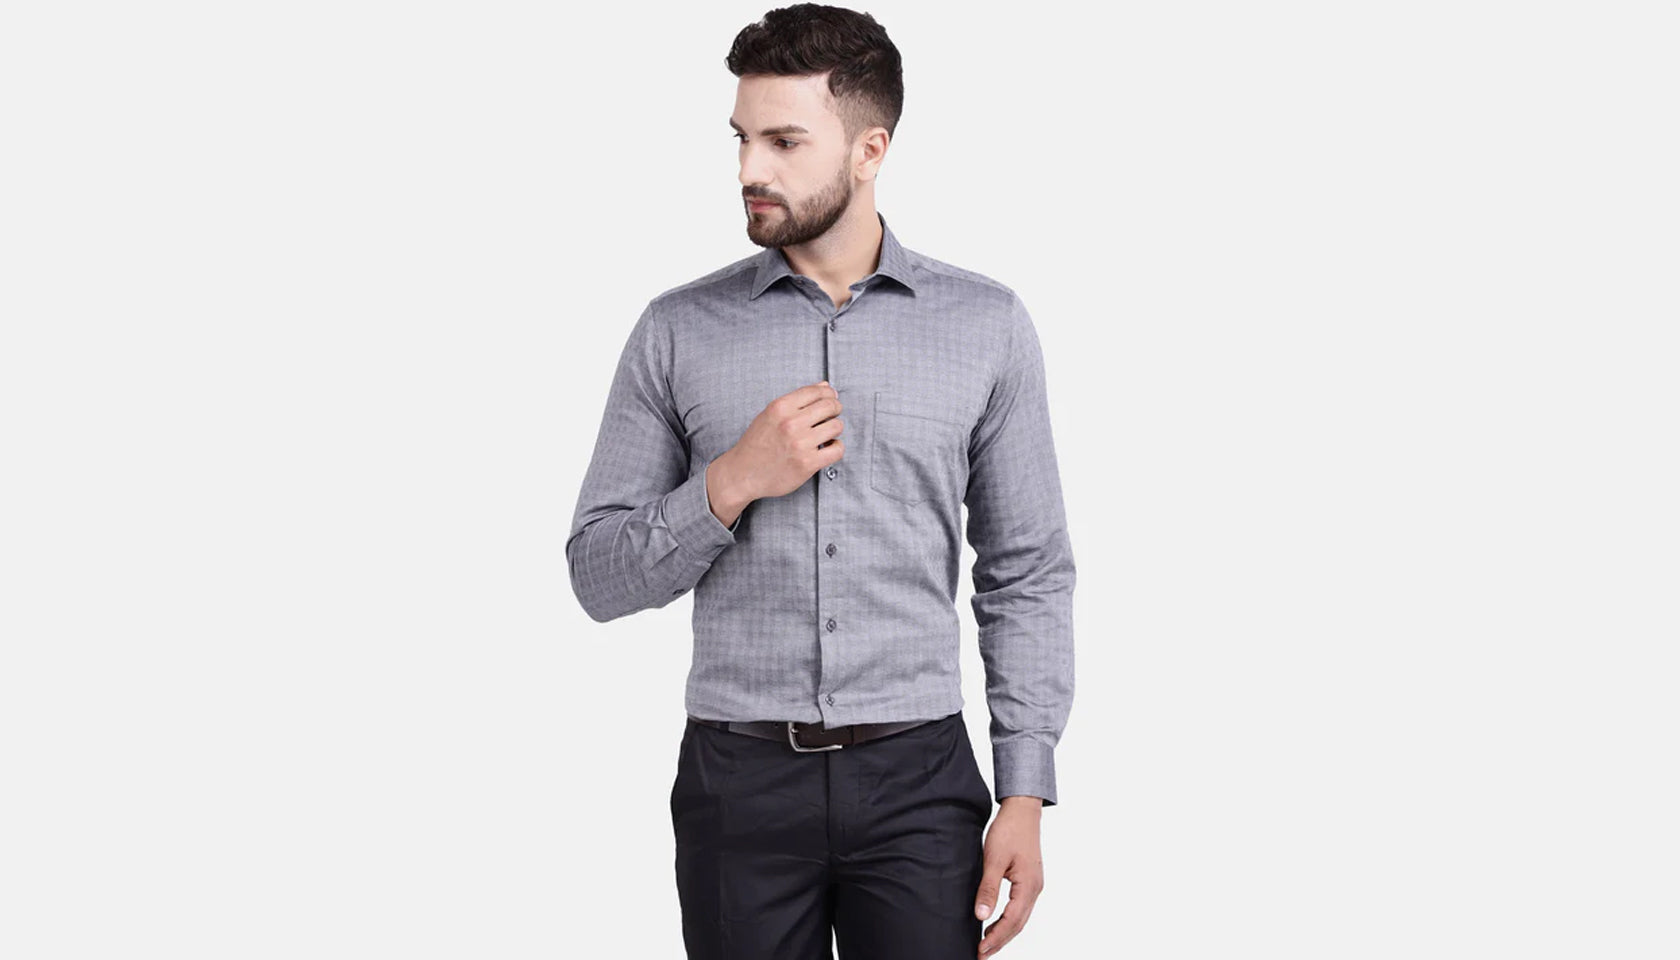 Elevate Your Wardrobe with Cotstyle Premium Luthai Mercerized Cotton Shirts